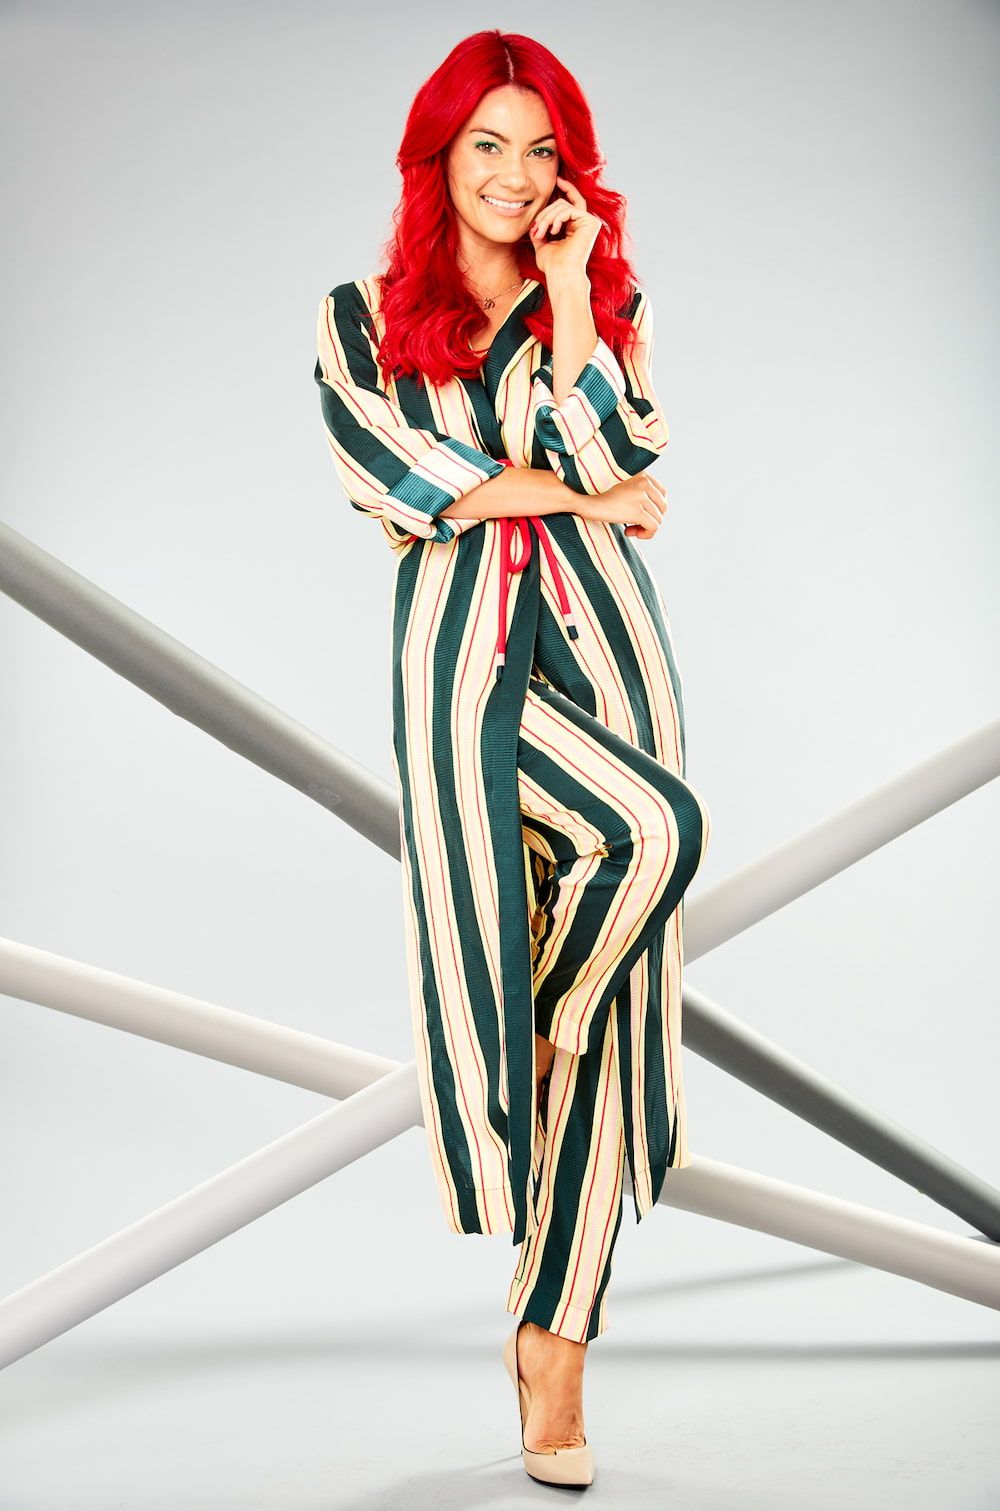 Dianne Buswell wearing a striped two piece, standing with one leg raised across the other